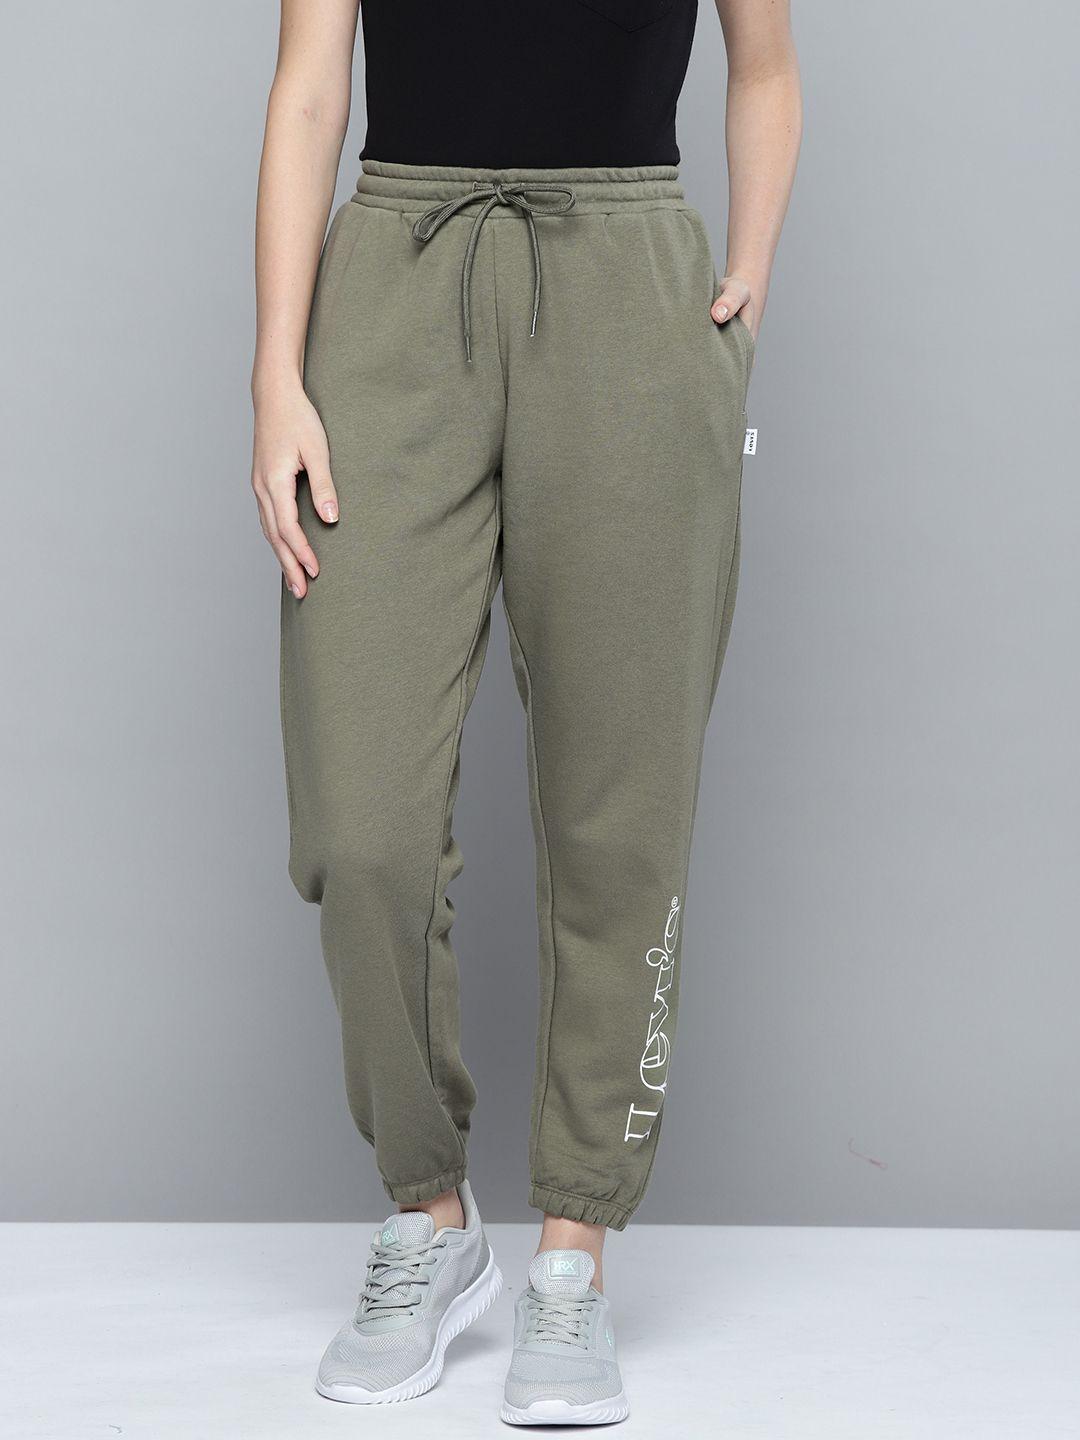 levis-women-olive-green-solid-joggers-with-brand-logo-print-detail